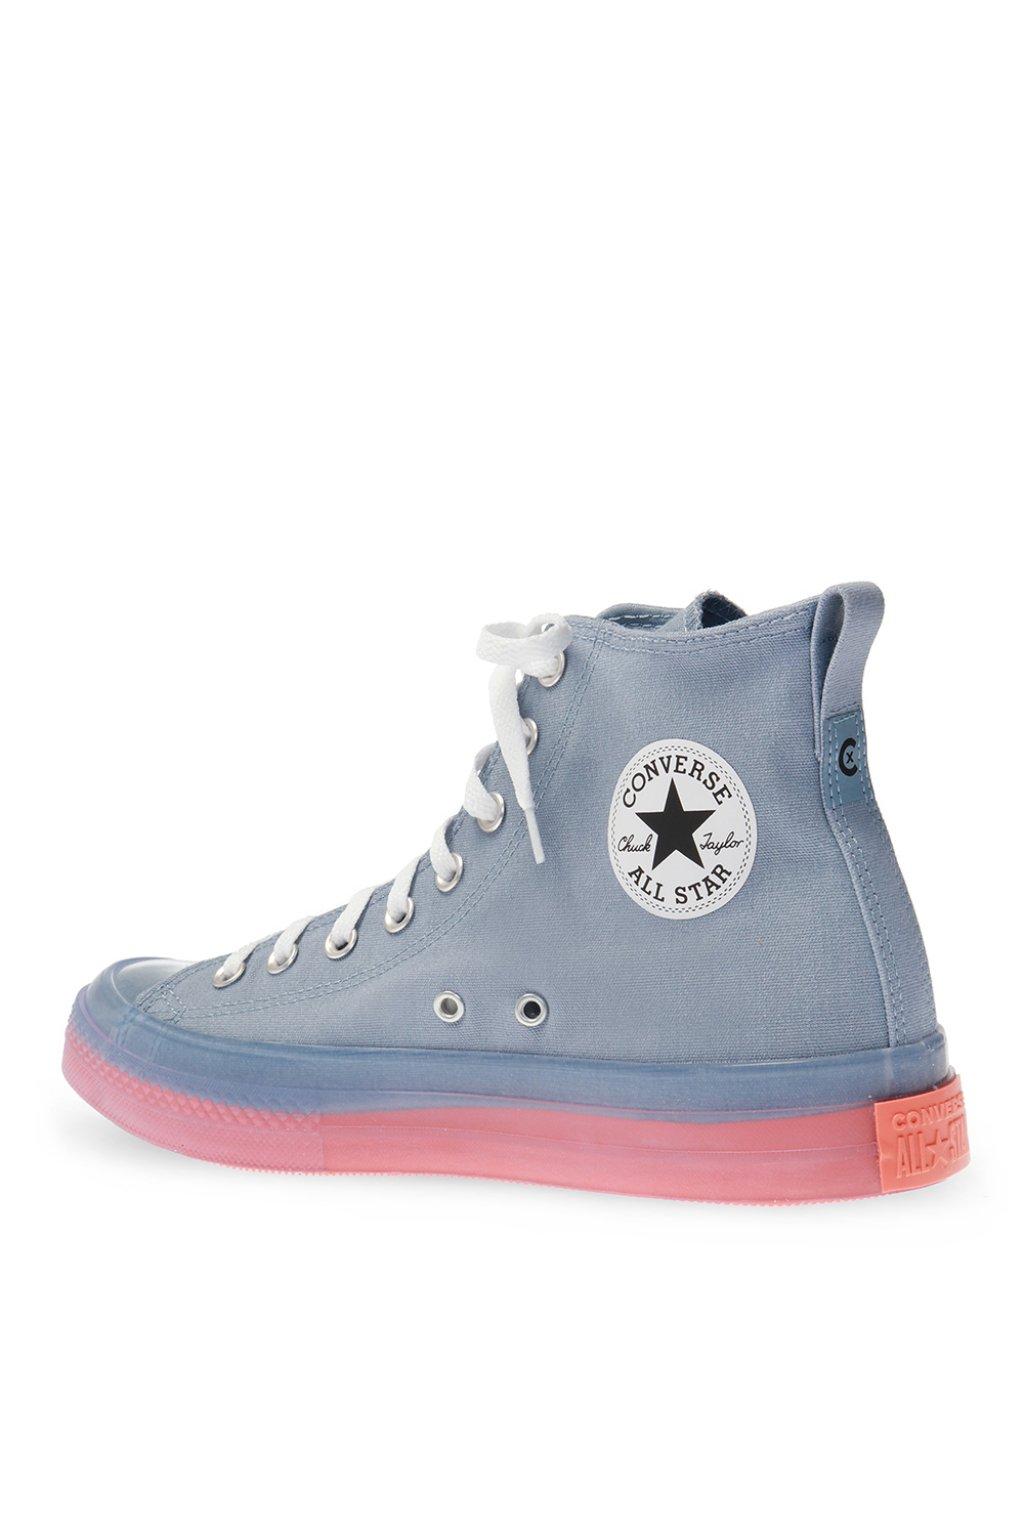 Converse Rubber 'chuck Taylor All Star Cx' High-top Sneakers in Grey (Gray)  for Men - Lyst